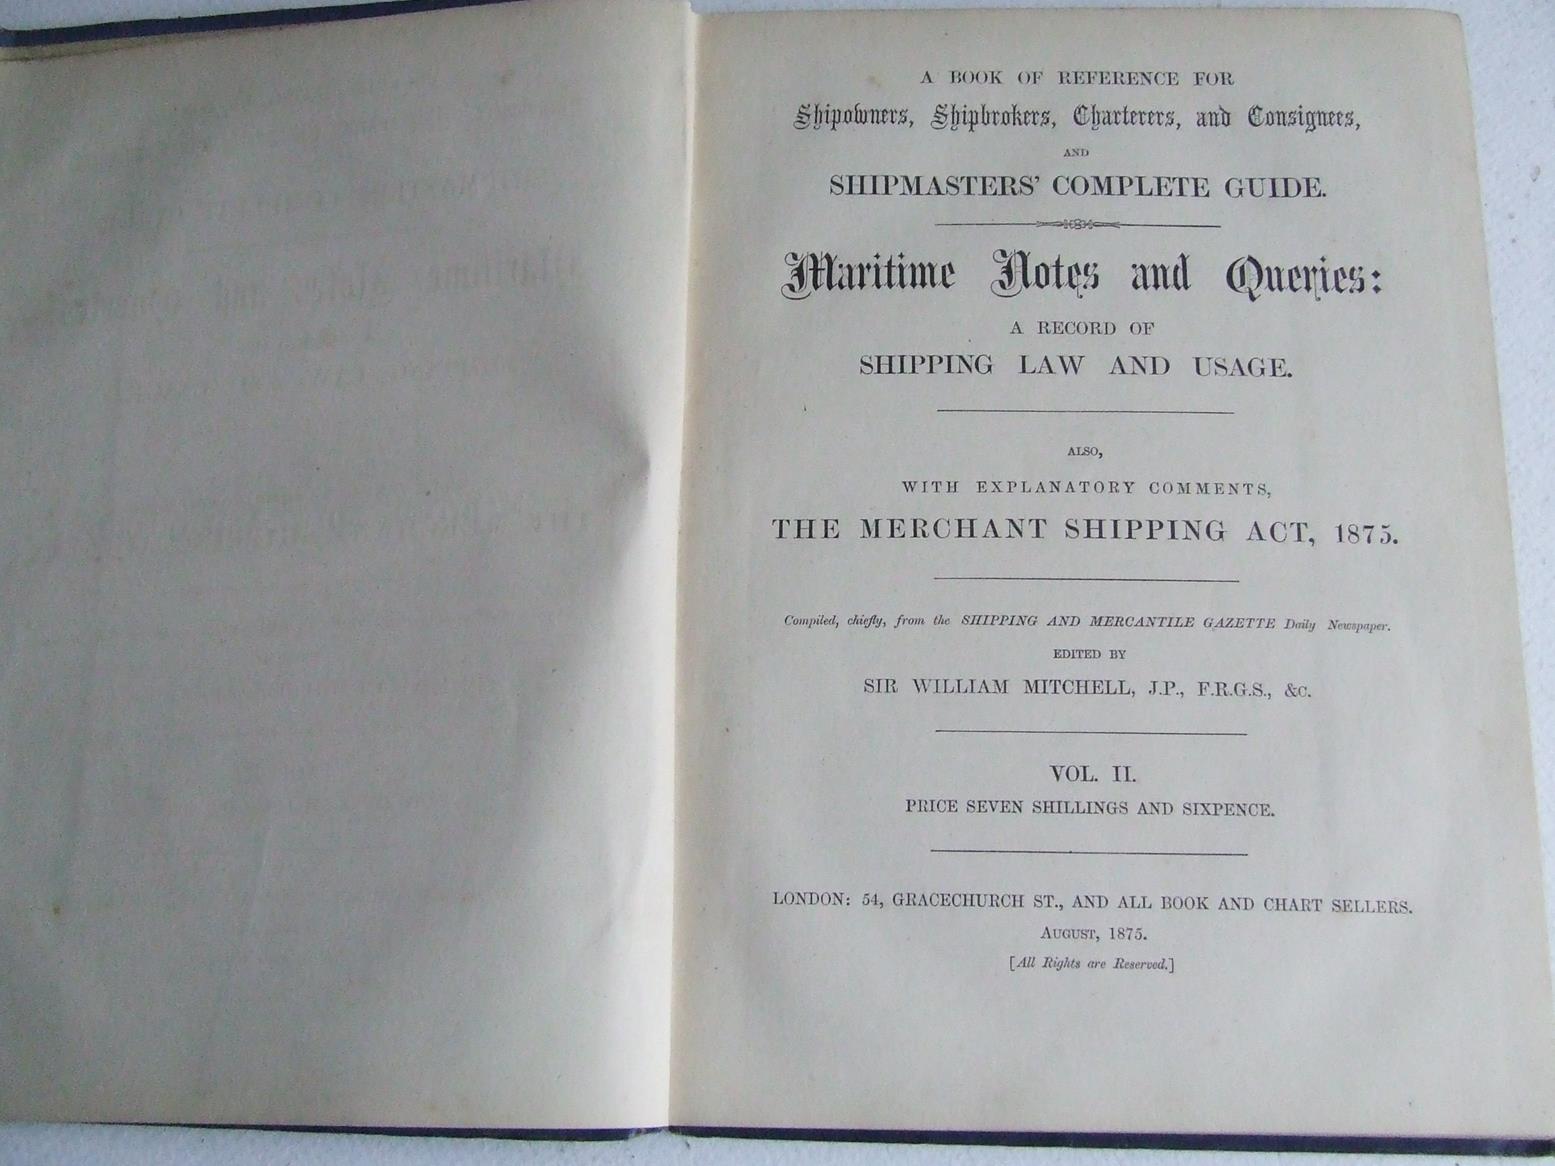 Maritime Notes and Queries: a record of shipping law and usage. also, with explanatory comments, The Merchant Shipping Act,1875.